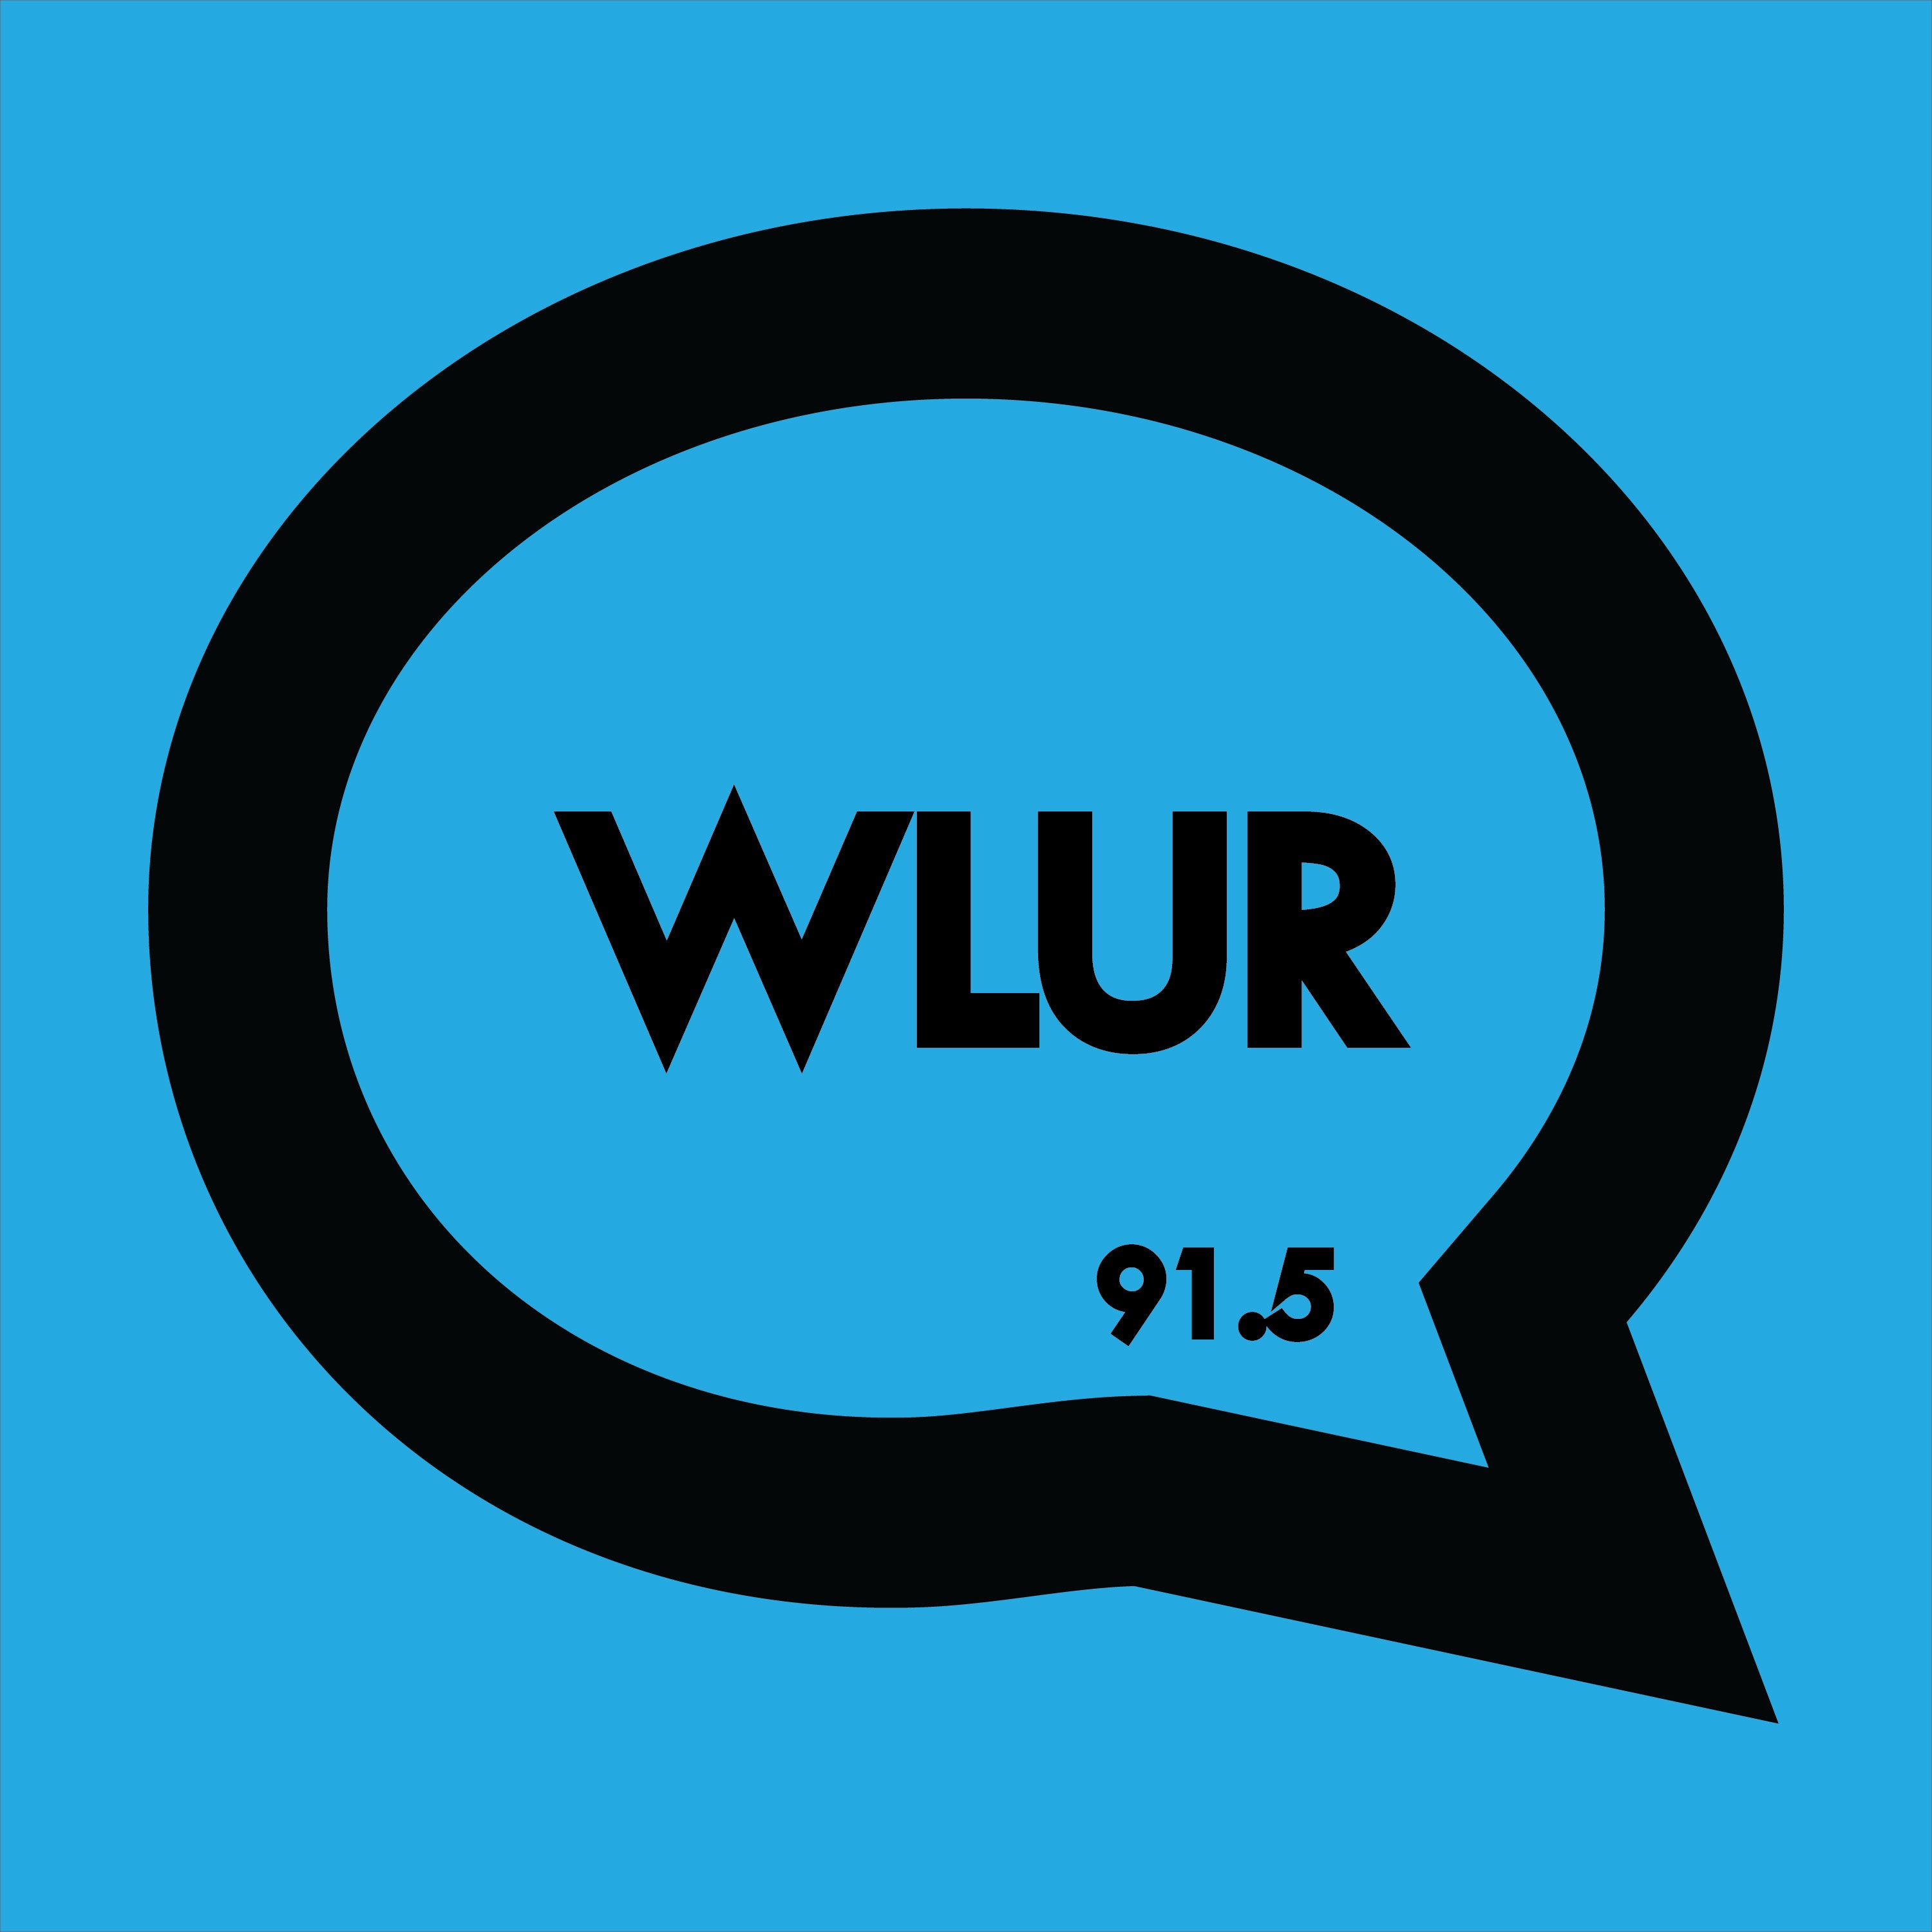 Stream WLUR 91.5 FM | Listen to podcast episodes online for free on  SoundCloud